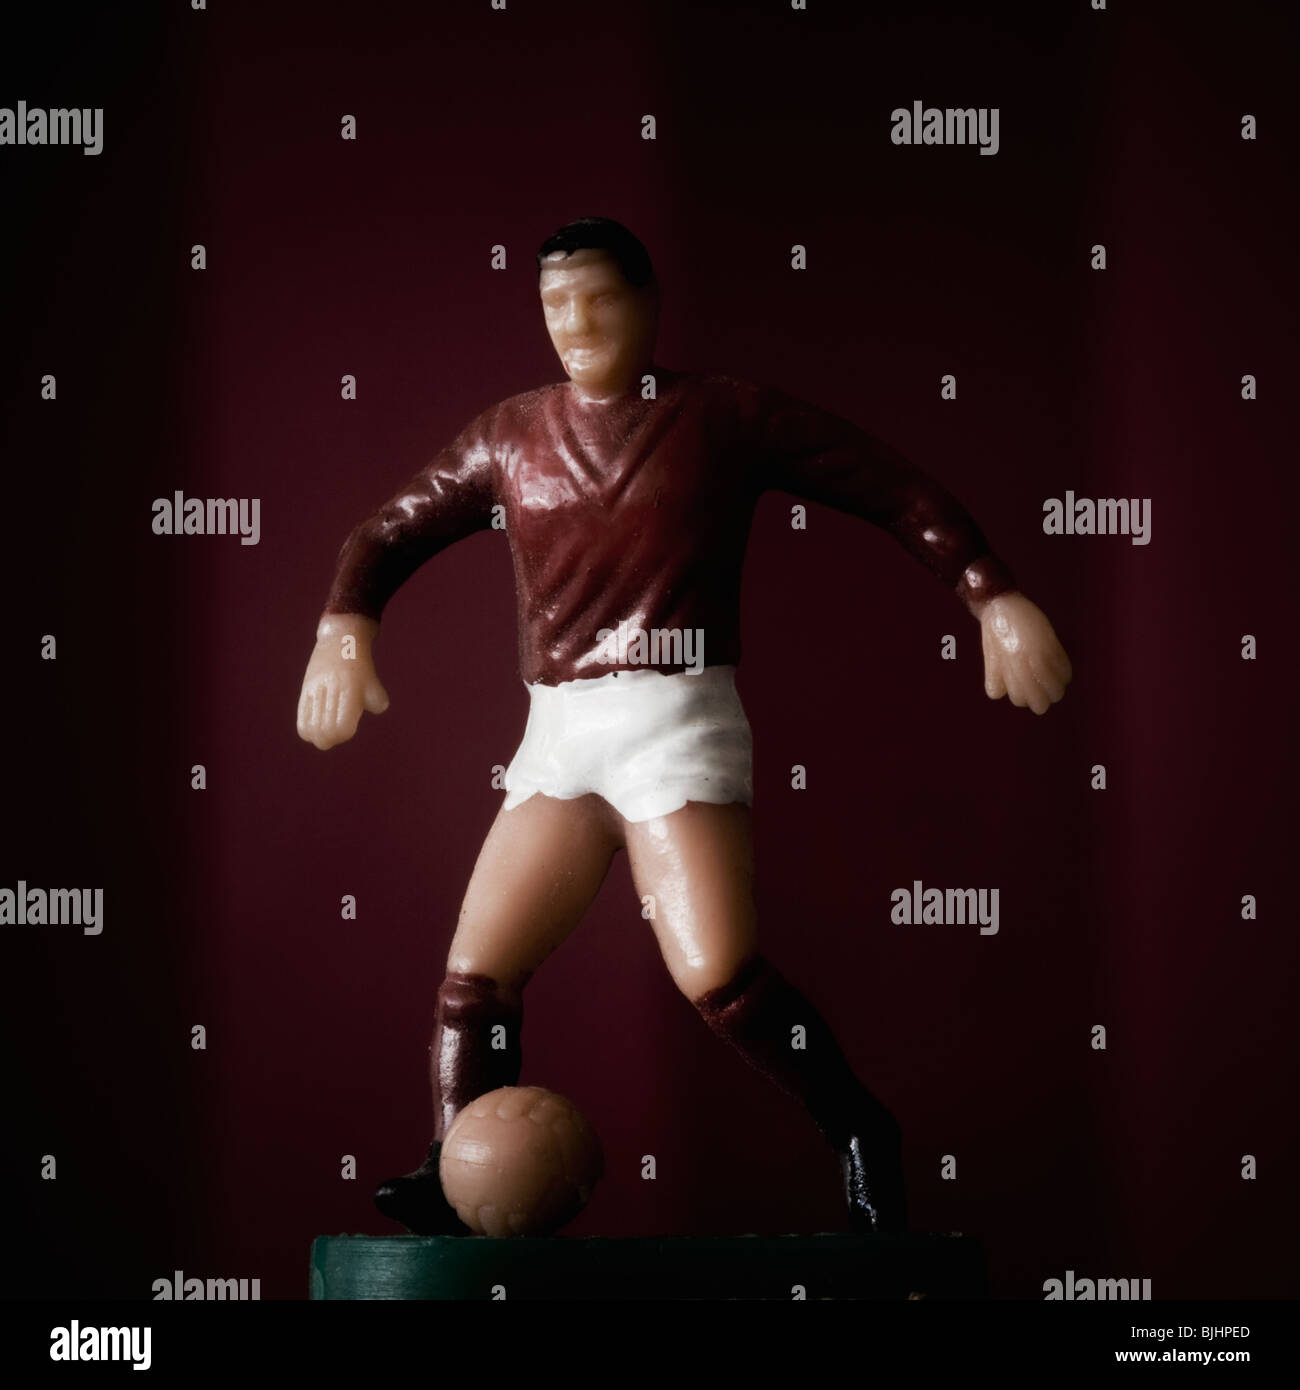 Figurine of soccer player Stock Photo